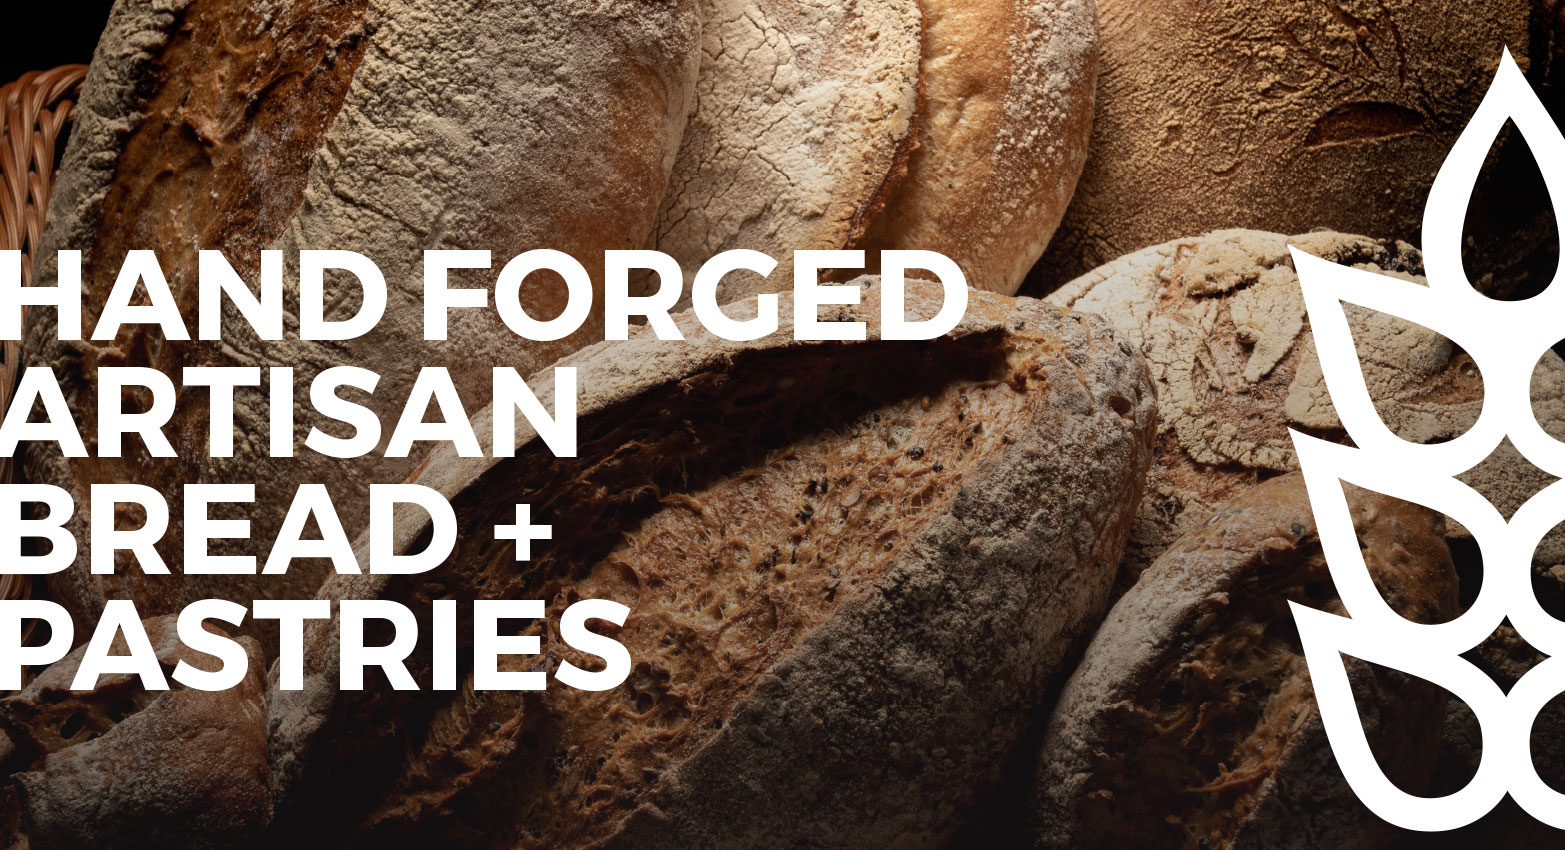 Hand Forged Artisan Bread Plus Pastries